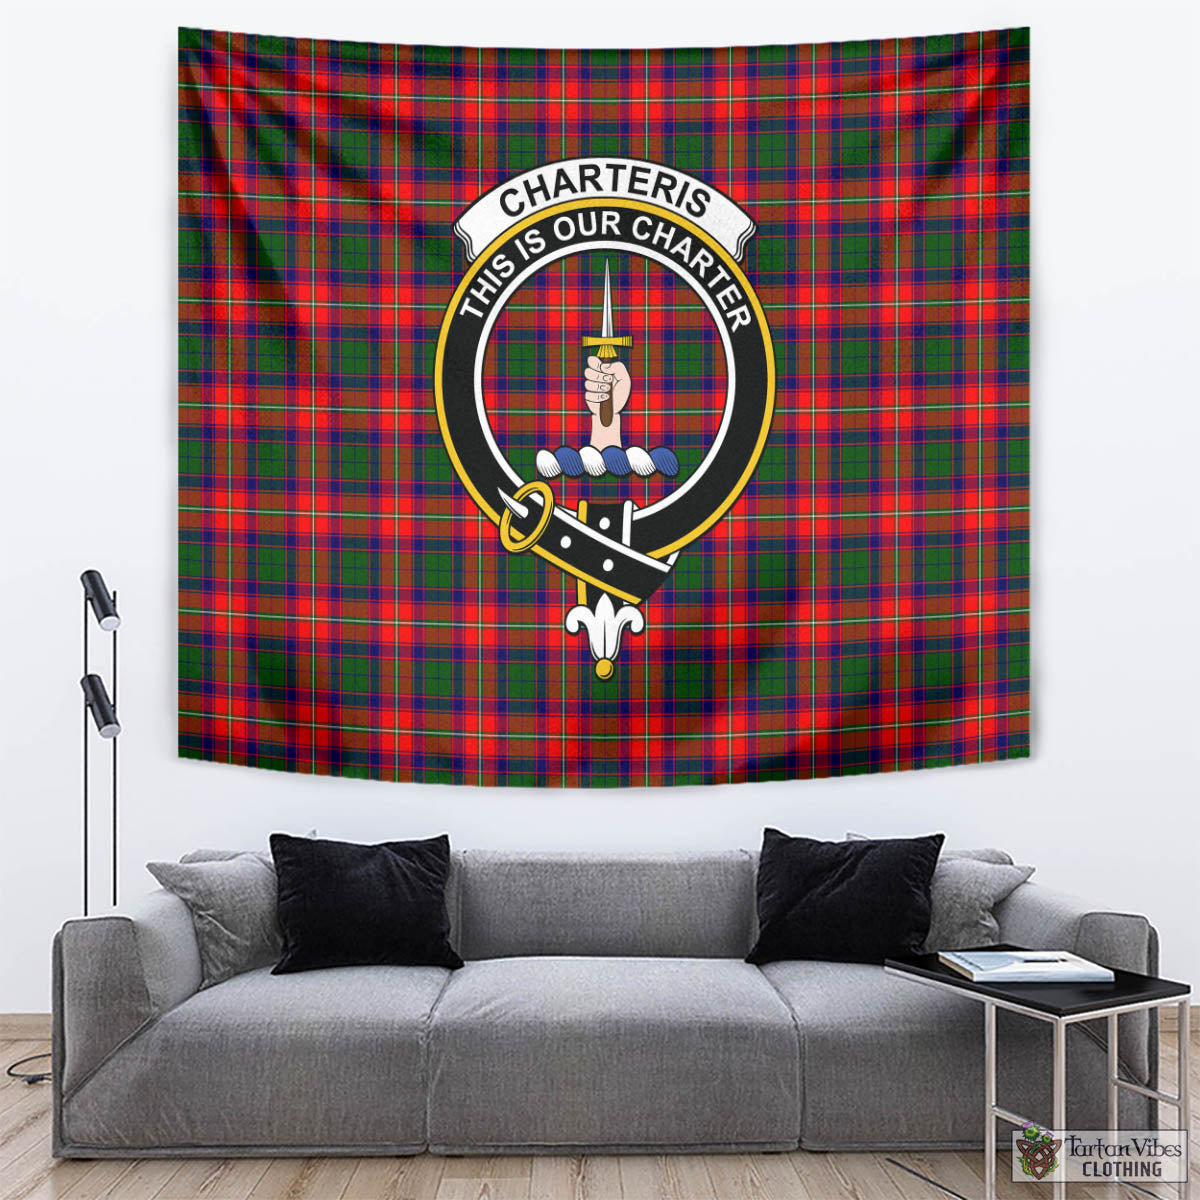 Tartan Vibes Clothing Charteris Tartan Tapestry Wall Hanging and Home Decor for Room with Family Crest